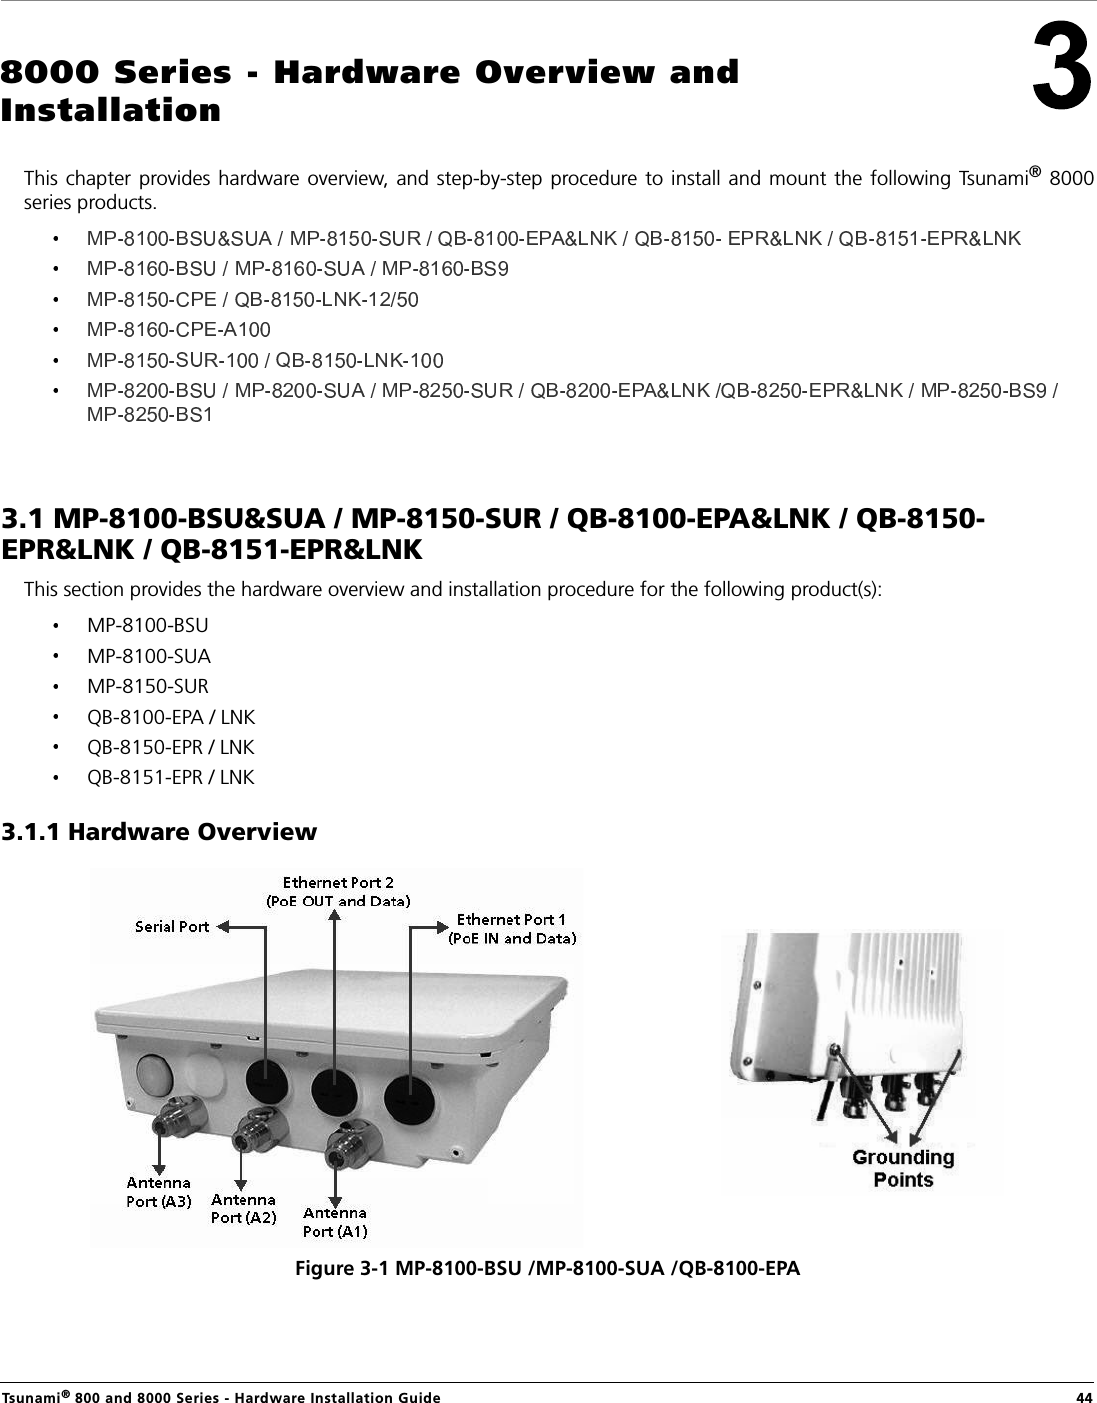 Tsunami® 800 and 8000 Series - Hardware Installation Guide  448000 Series - Hardware Overview and InstallationThis chapter  provides hardware overview,  and  step-by-step  procedure to  install  and  mount  the  following  Tsunami® 8000series products. 3.1 MP-8100-BSU&amp;SUA / MP-8150-SUR / QB-8100-EPA&amp;LNK / QB-8150- EPR&amp;LNK / QB-8151-EPR&amp;LNKThis section provides the hardware overview and installation procedure for the following product(s): MP-8100-BSUMP-8100-SUAMP-8150-SURQB-8100-EPA / LNK QB-8150-EPR / LNKQB-8151-EPR / LNK3.1.1 Hardware OverviewFigure 3-1 MP-8100-BSU /MP-8100-SUA /QB-8100-EPA